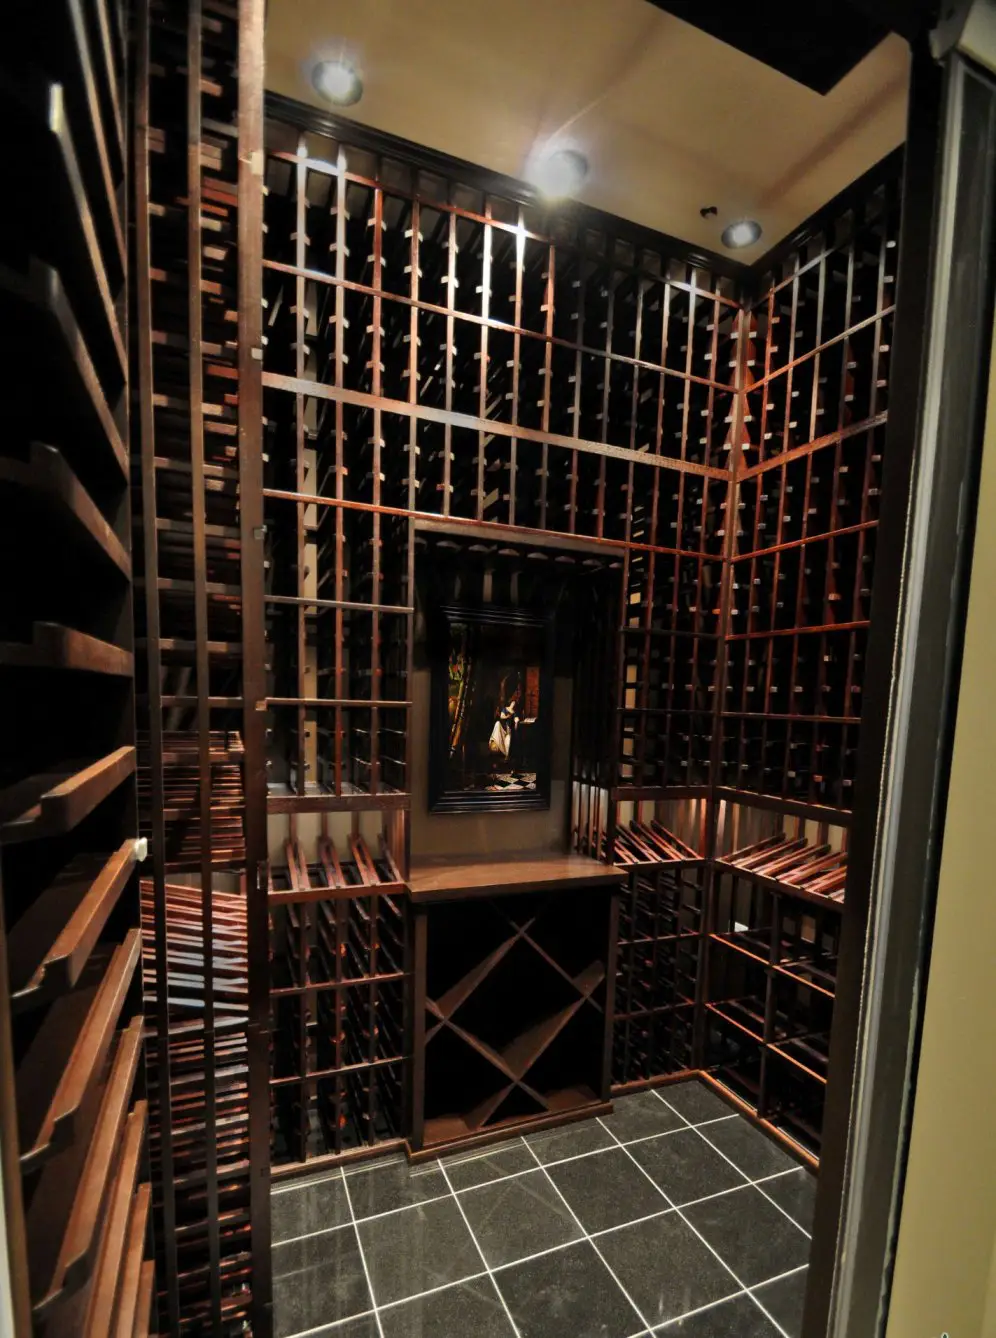 Climate Control System Stabilizes the Wine Cellar Environment